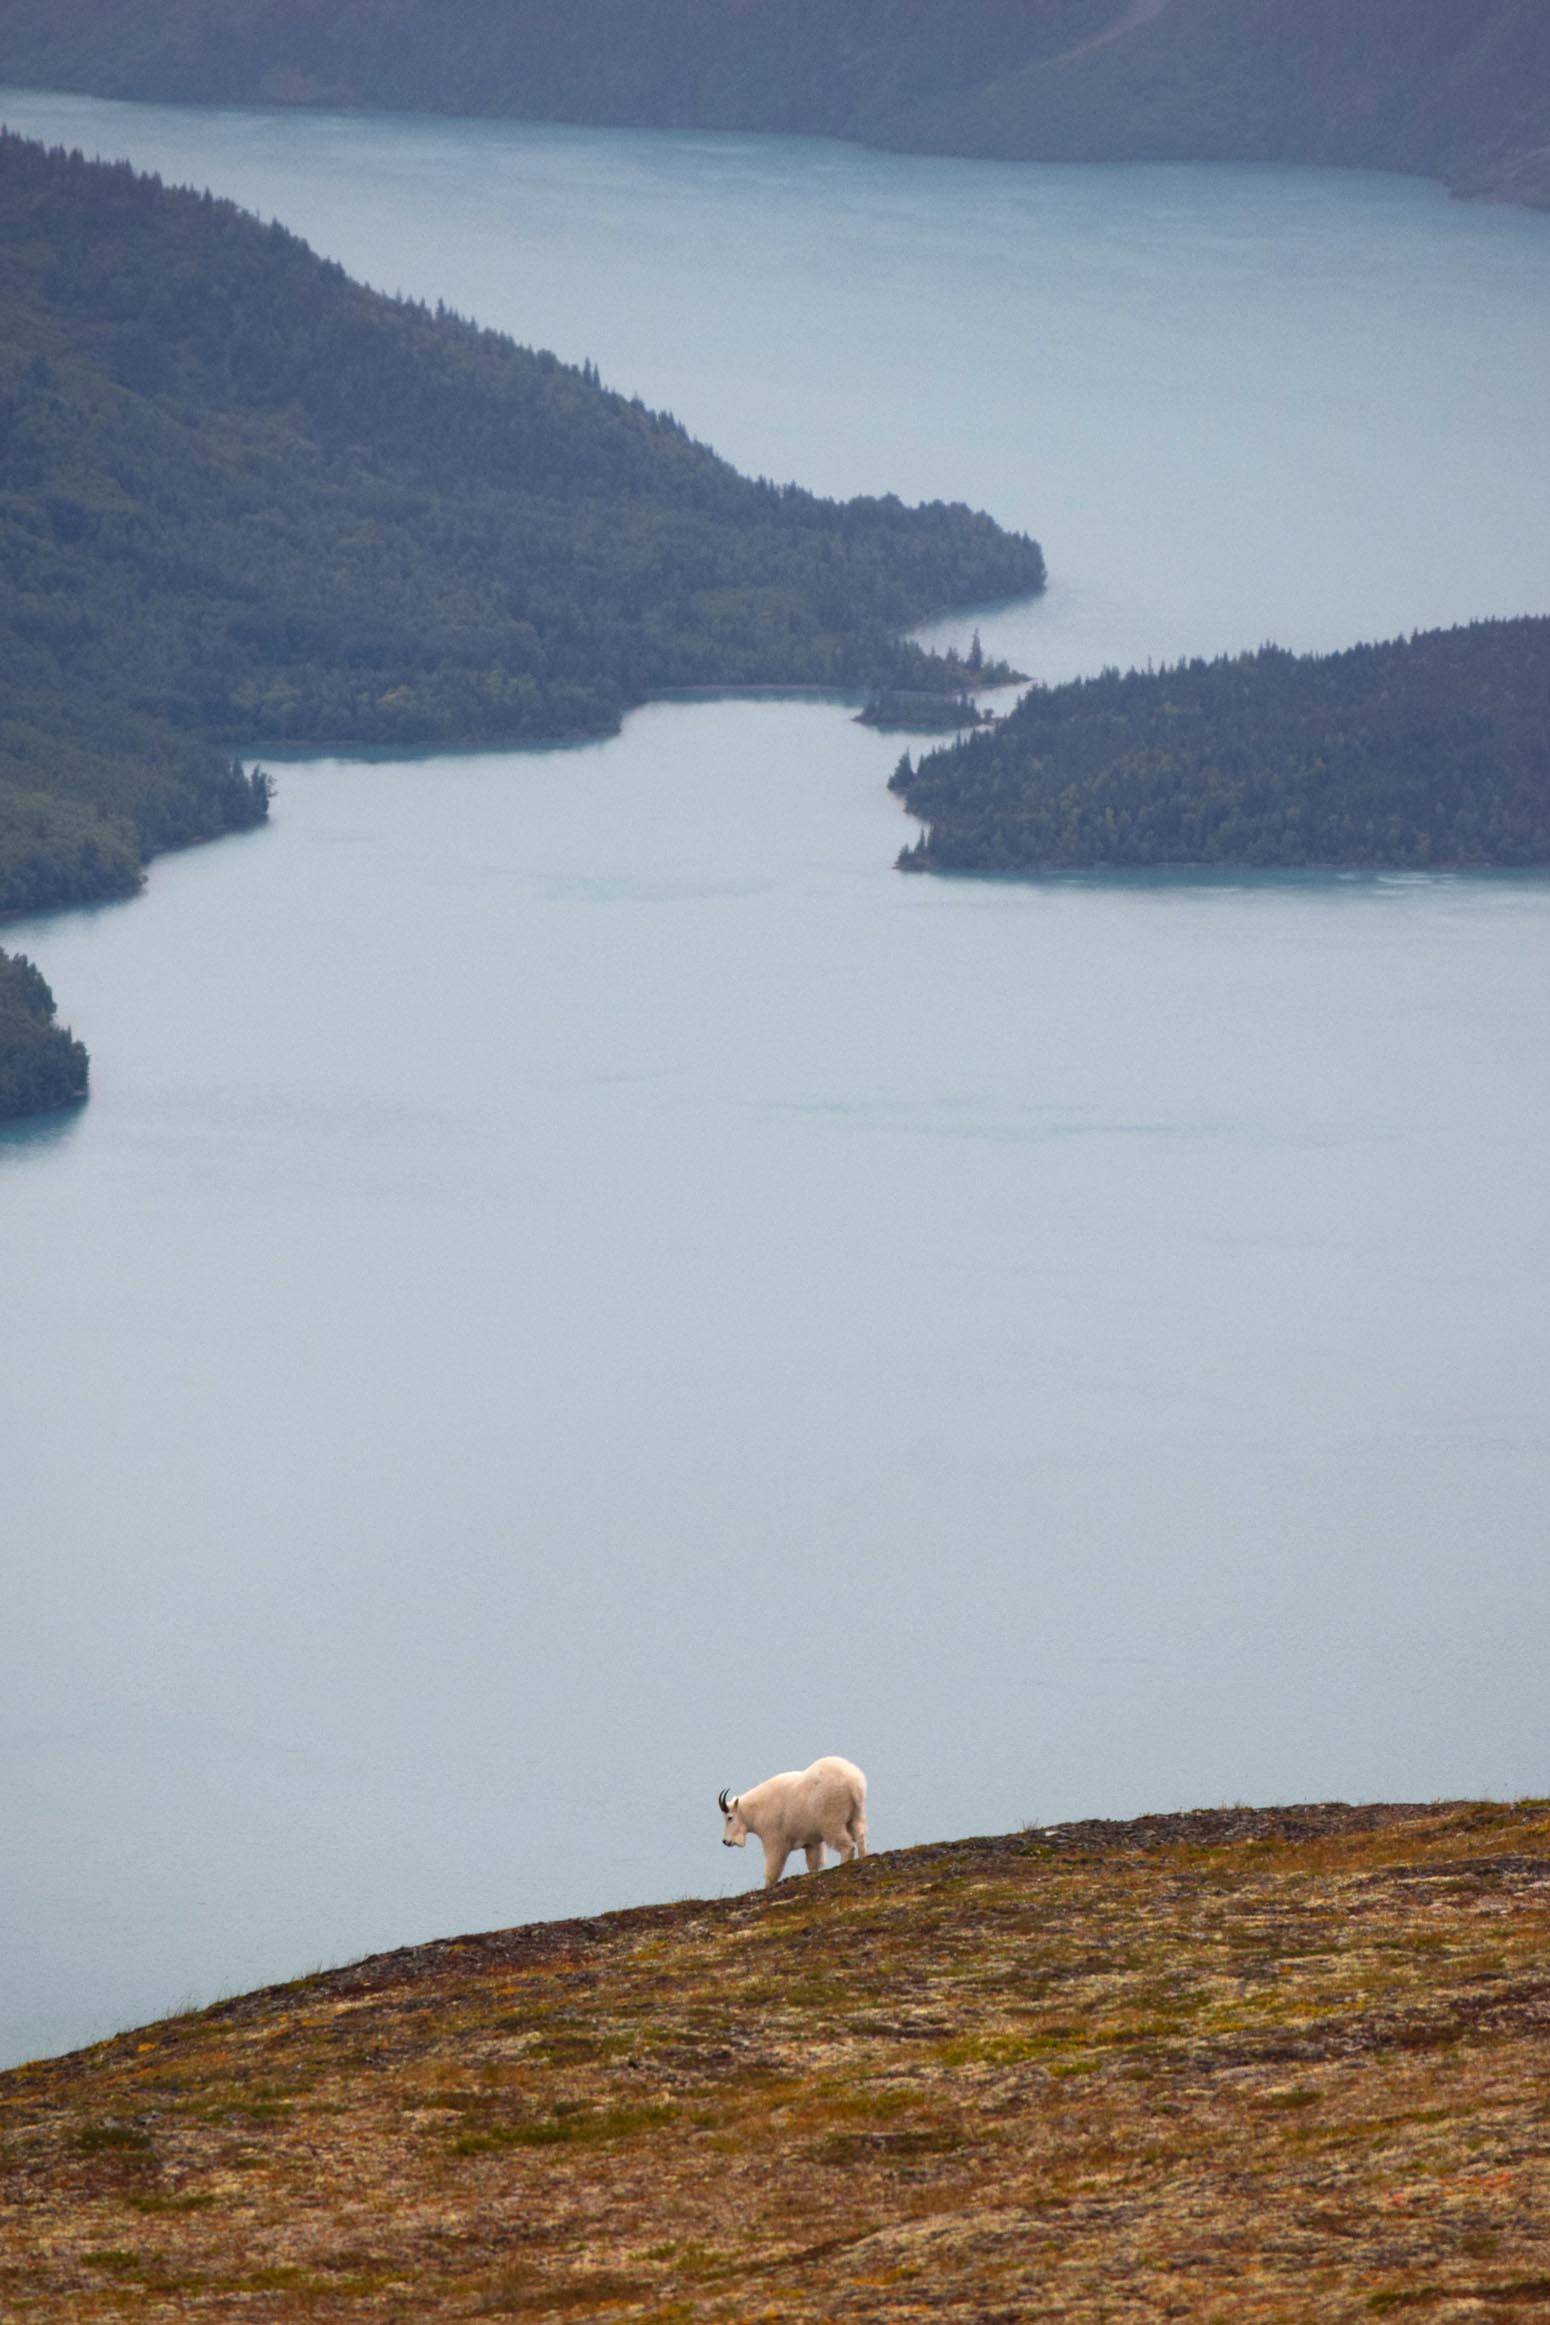 In this August 28, 2017 photo, a mountain goat descends the side of Cecil Rhode Mountain above Kenai Lake near Cooper Landing, Alaska. Mountain goats in Alaska typically live in remote alpine habitats. (Photo by Kat Sorensen/Peninsula Clarion, file)